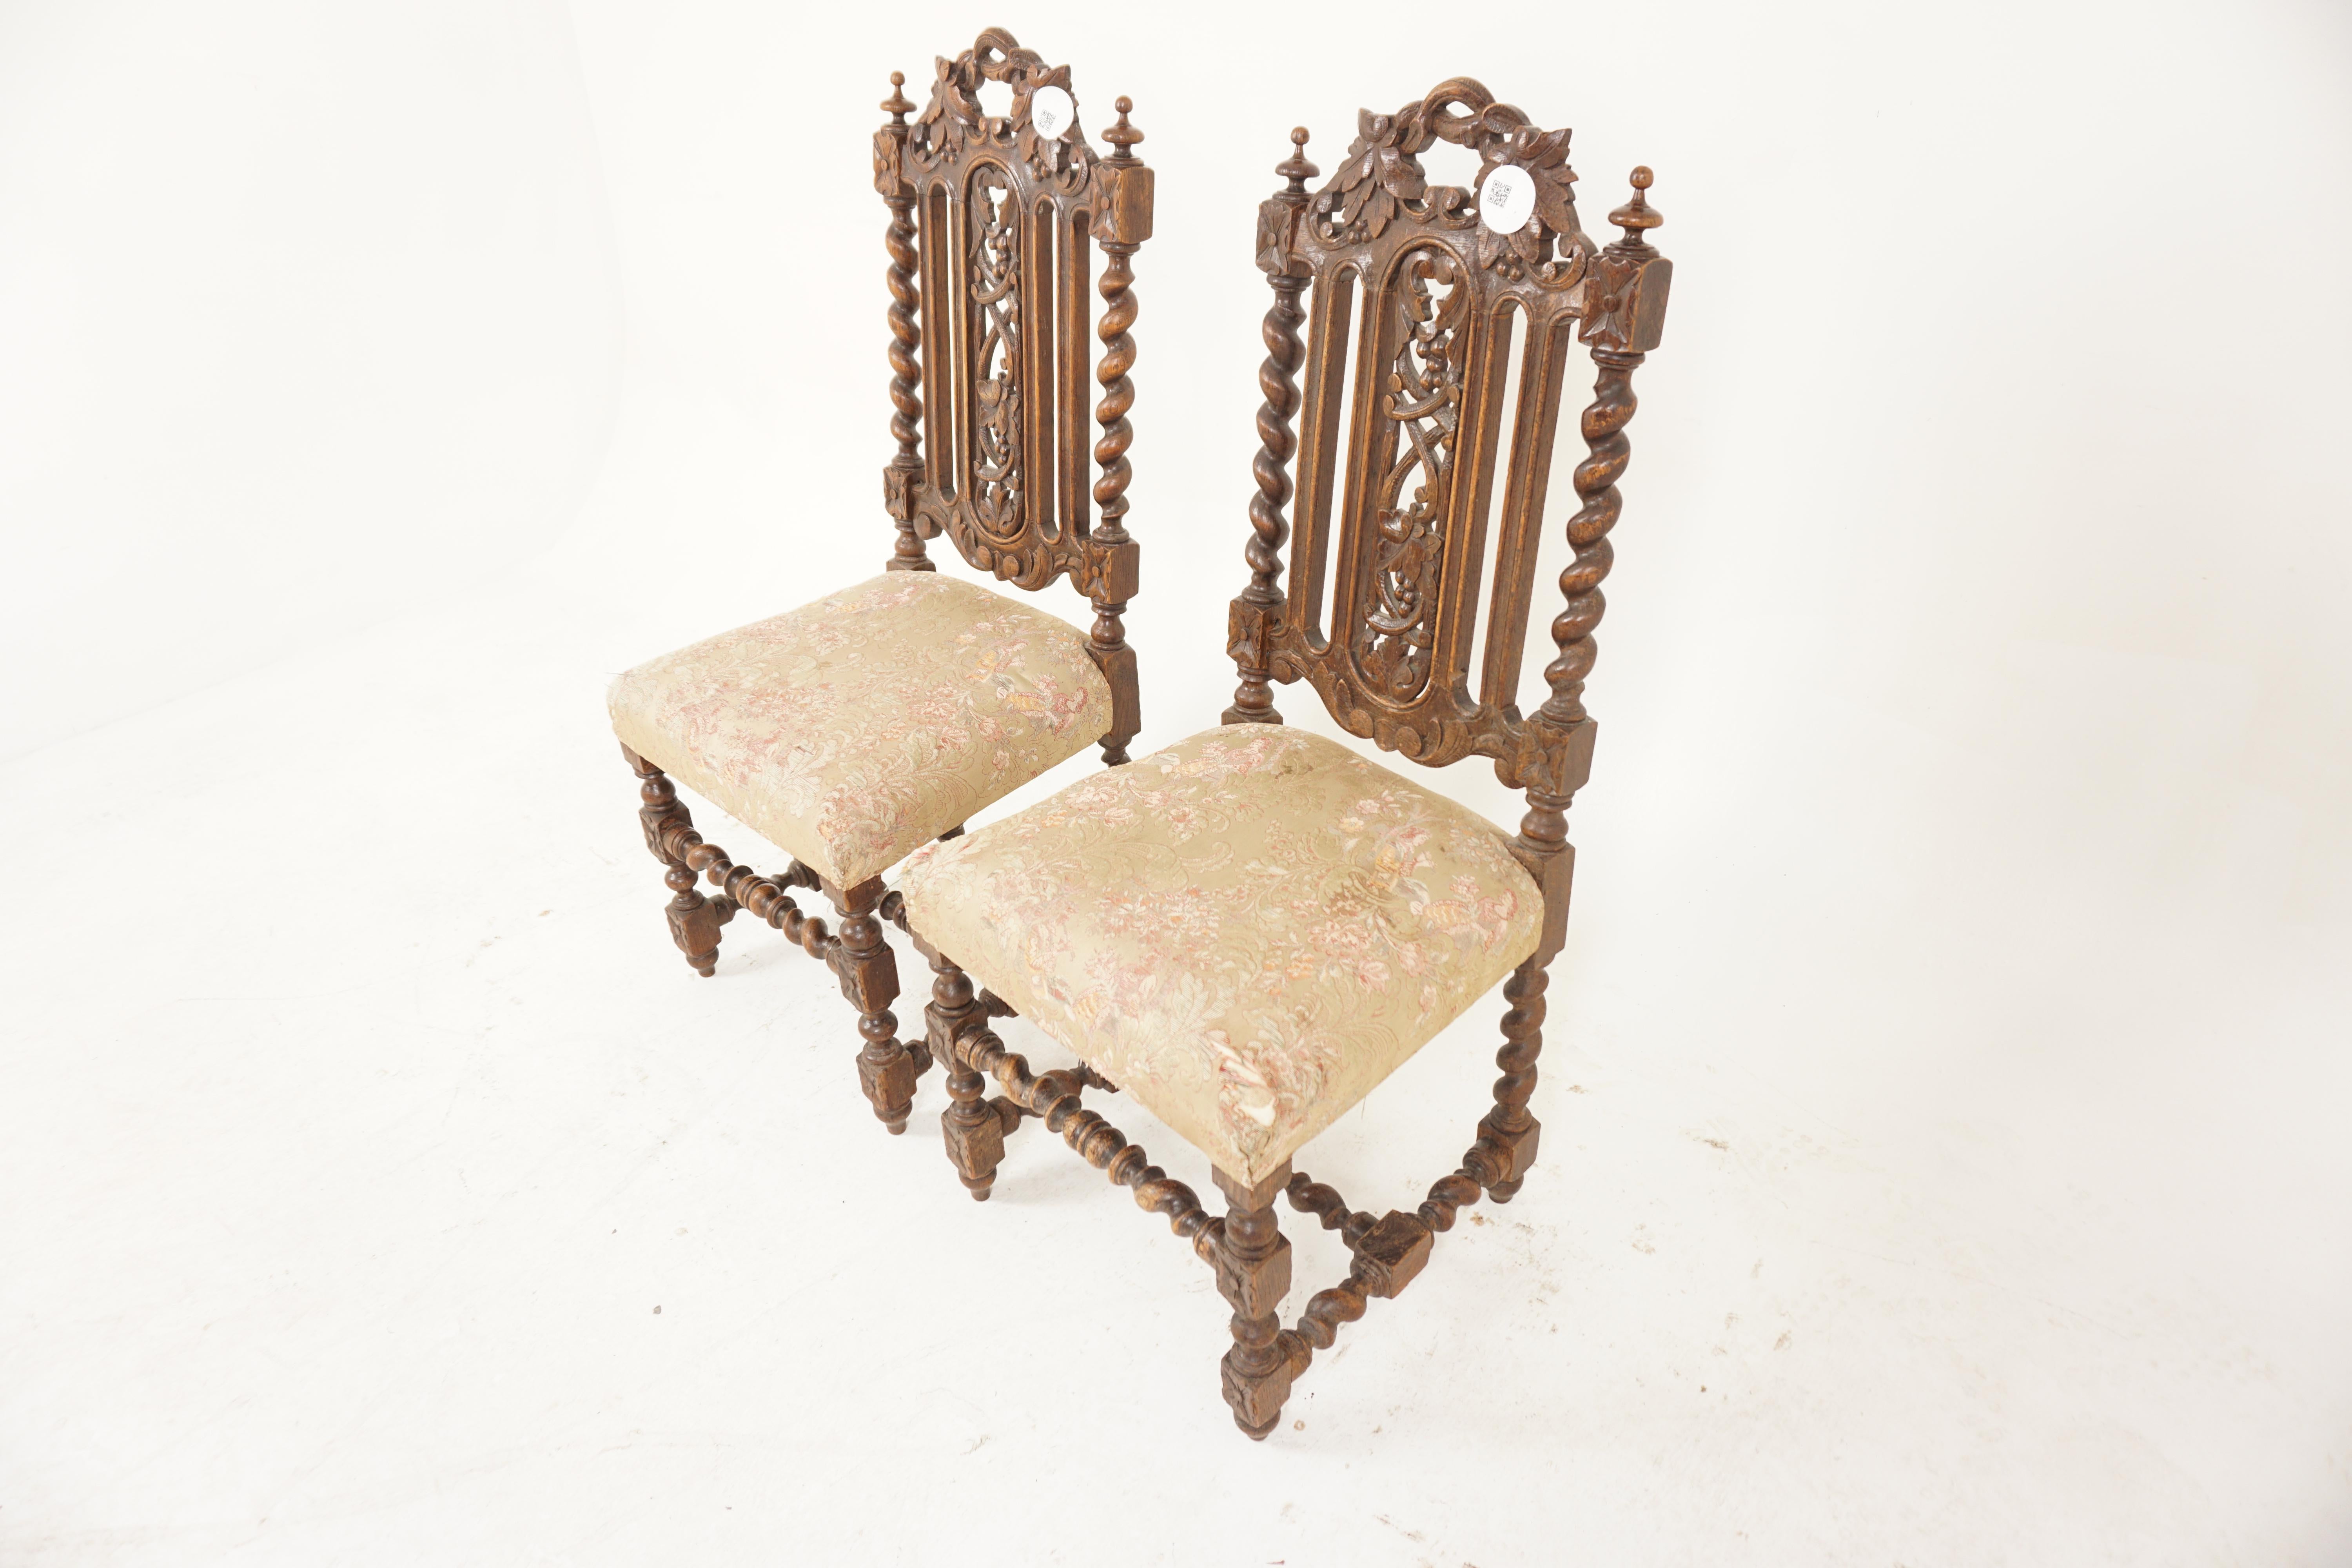 Antique Oak Chairs, Pair of Victorian Carved Oak Barley Twist Chairs, Antique Furniture, Scotland 1860, H1114

+ Scotland 1860
+ Solid Oak
+ Original Finish
+ Superb foliage carving on the top rail
+ Vertical slats with carved centre splat 
+